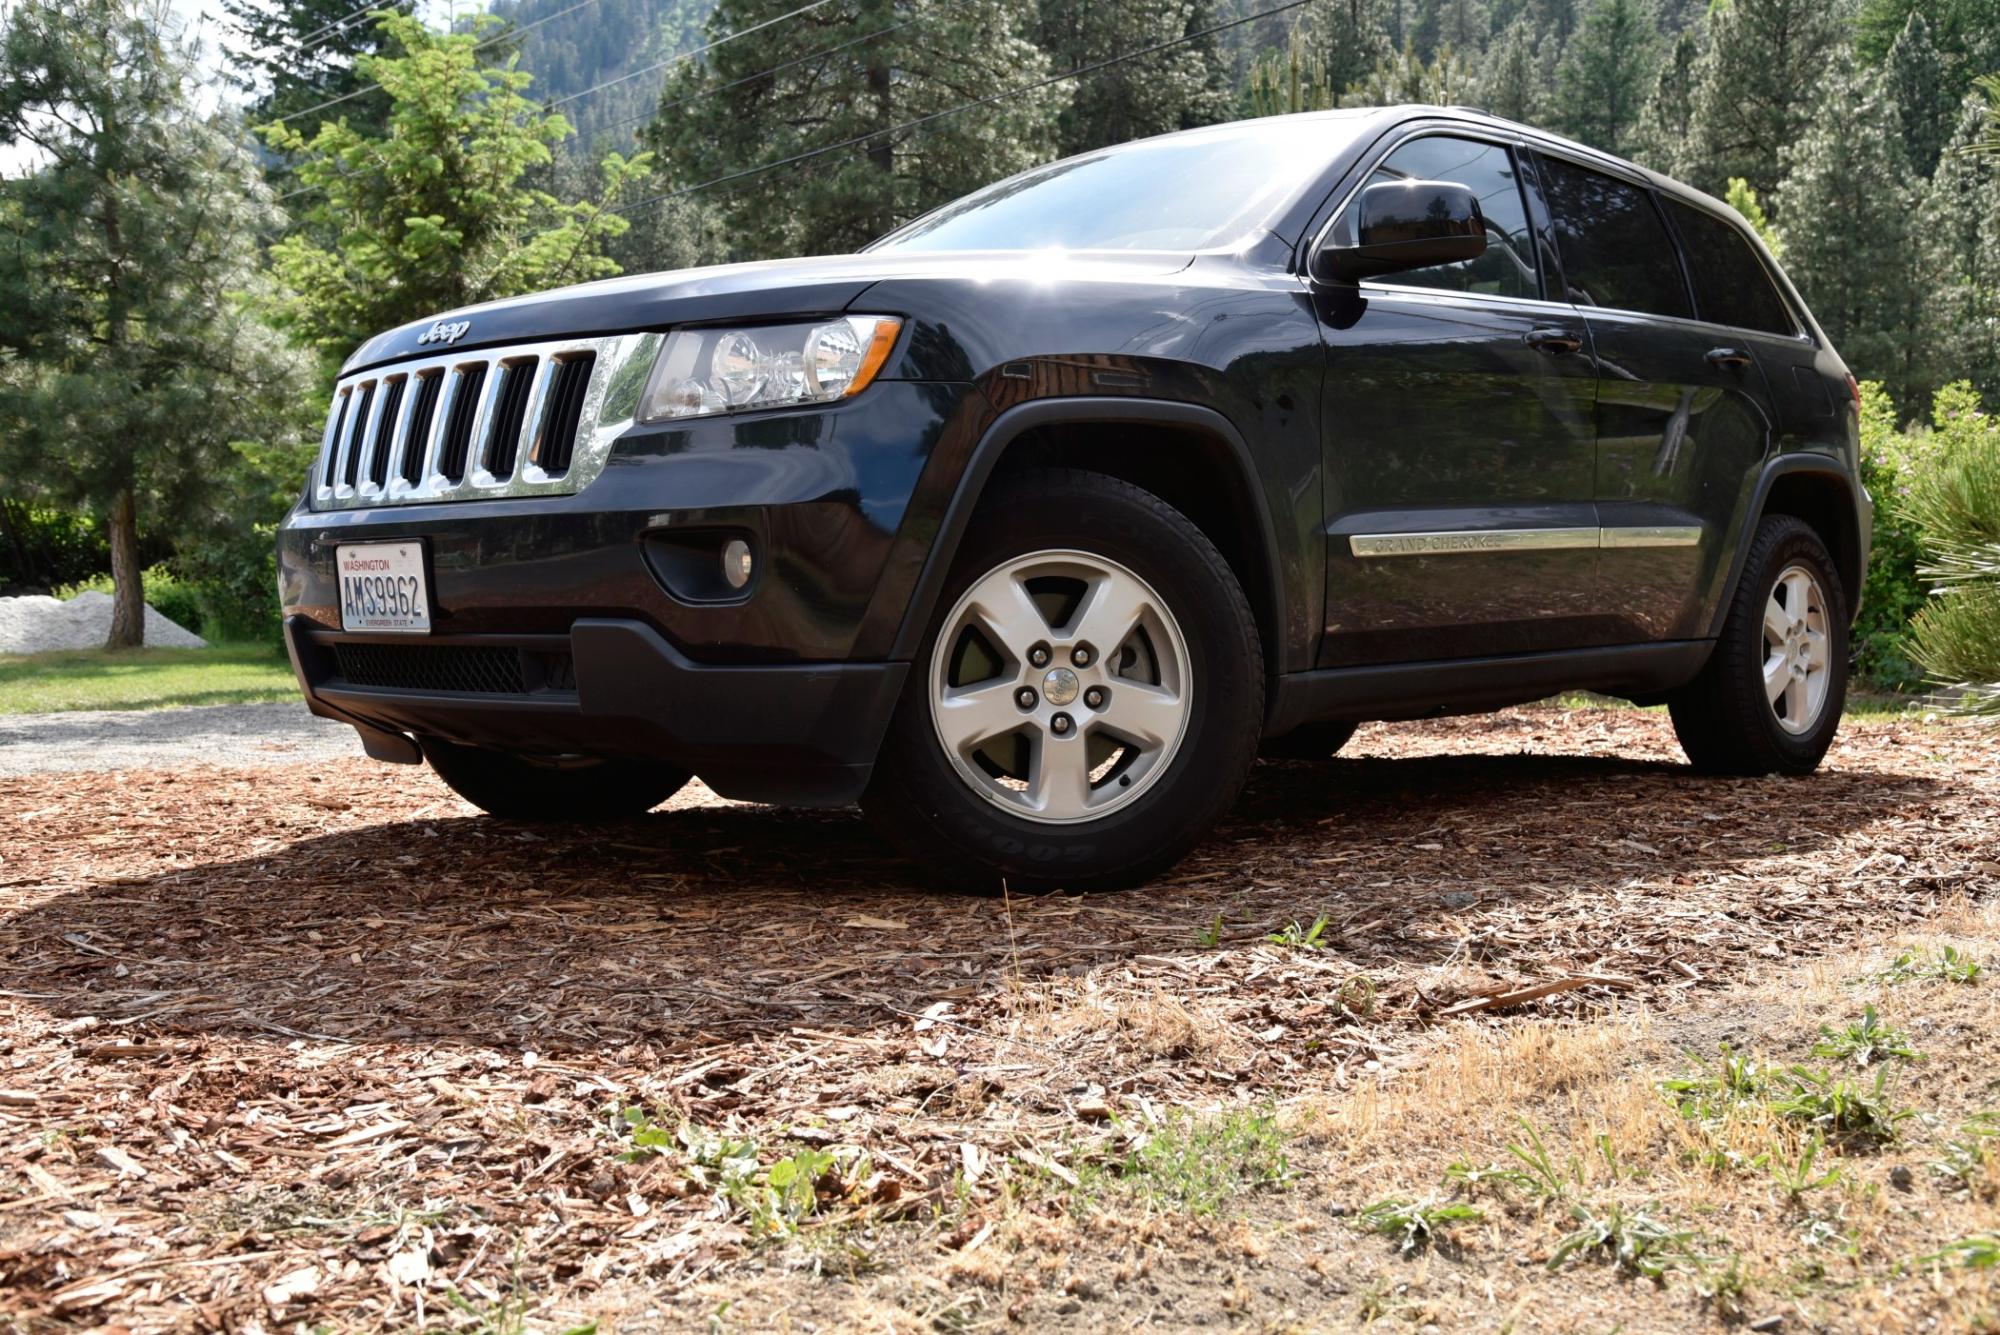 Jeep is known for its versatile, outdoors-ready vehicles.